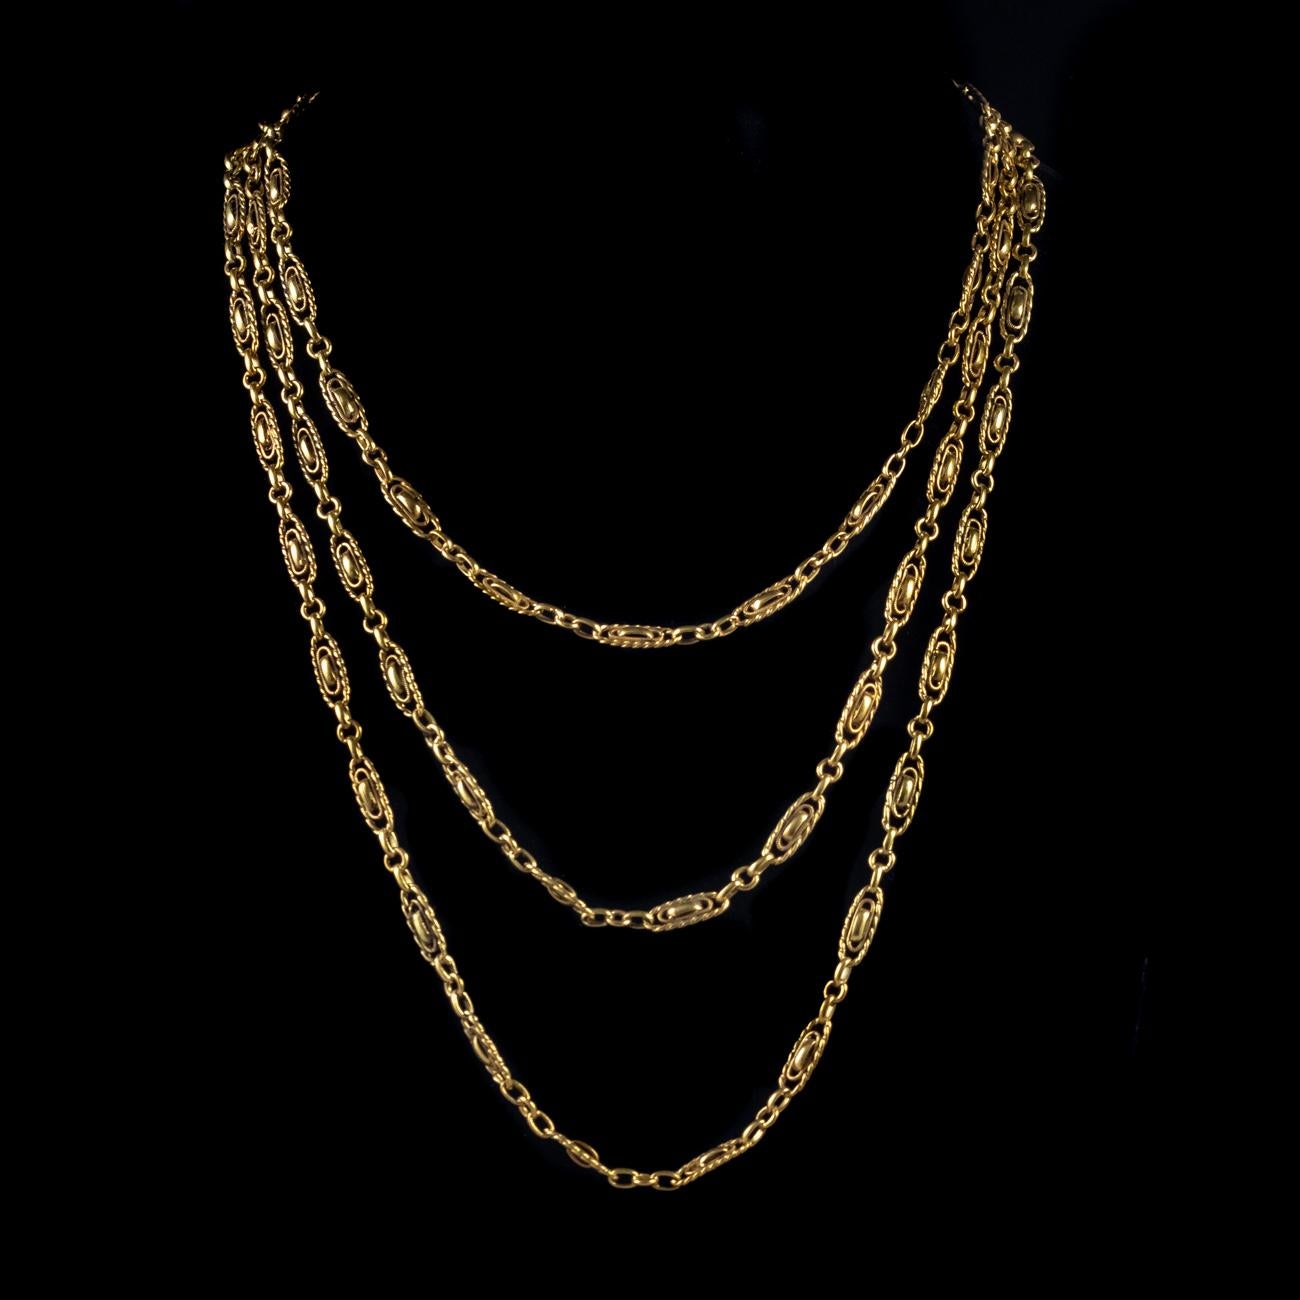 This beautiful Antique Victorian French long guard chain has been modelled in Silver gilded in 18ct Yellow Gold. It features elaborate double oval links spaced around the chain and a large ring clasp to hold it securely when worn.

It has aged